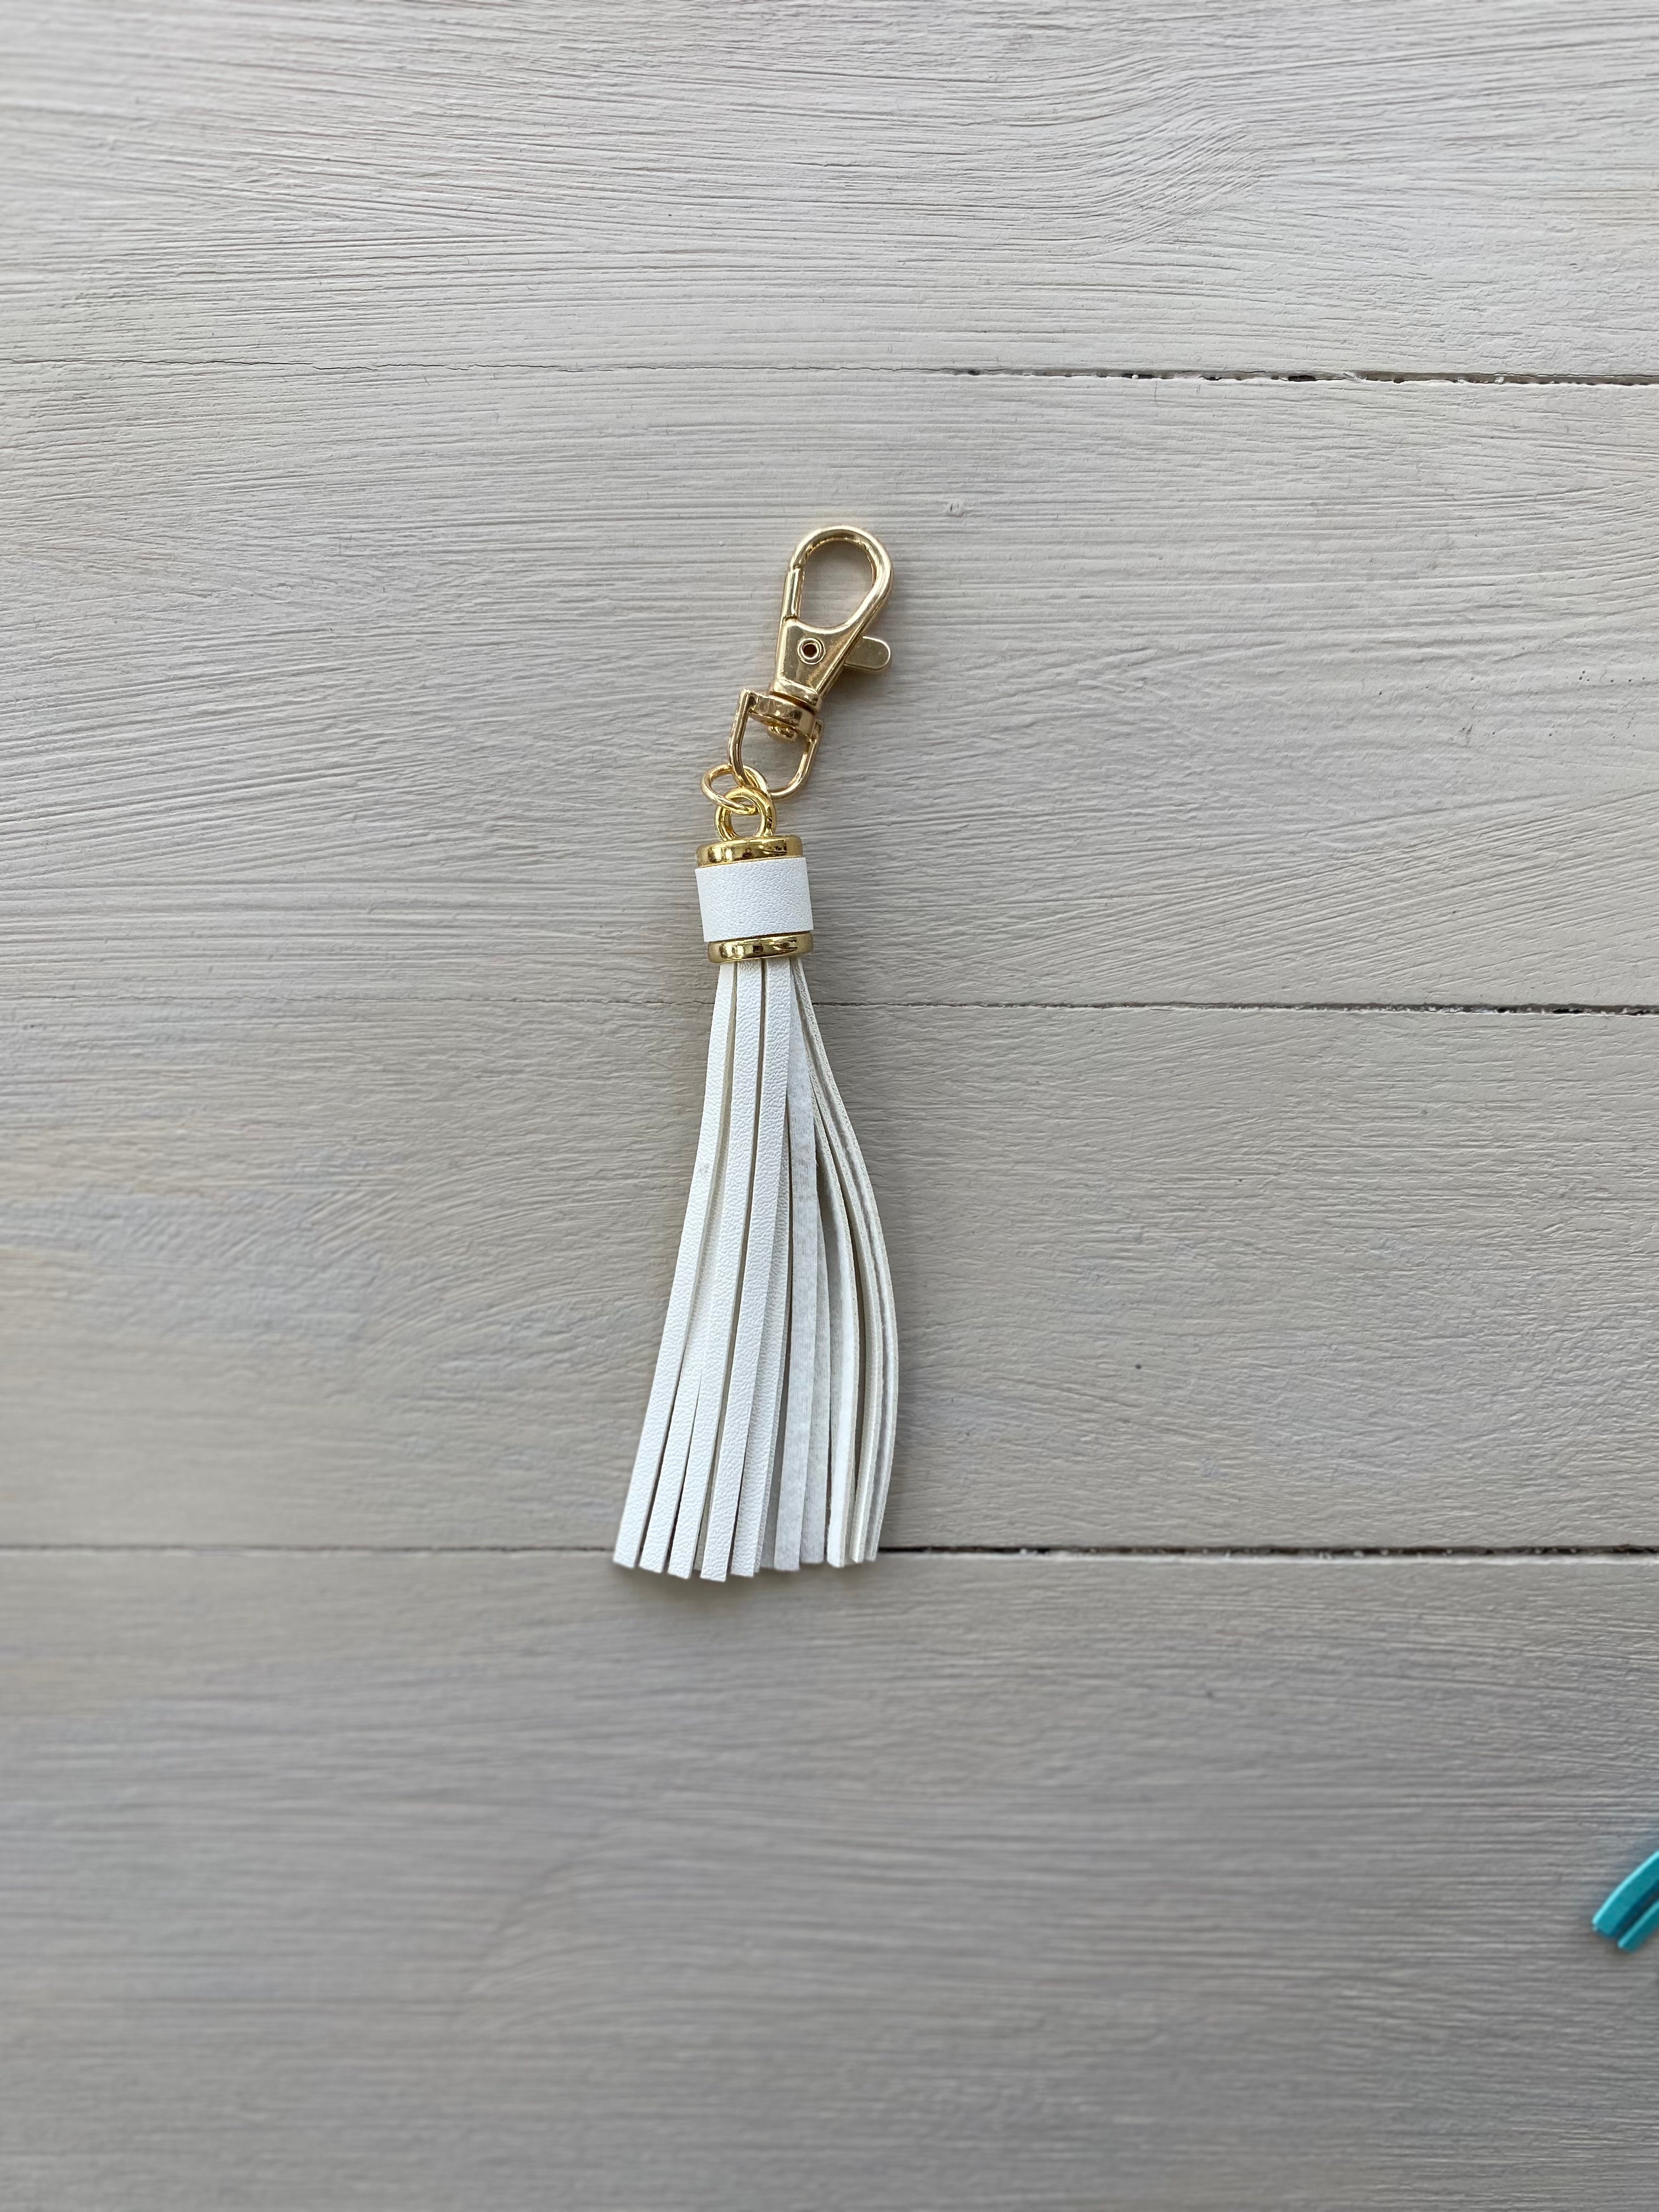 SVF Dark Champagne Gold Faux Leather Tassel and Motivational Engraved Acrylic Charm of choice! (Copy) The Mustard Seed Collection, The Seed